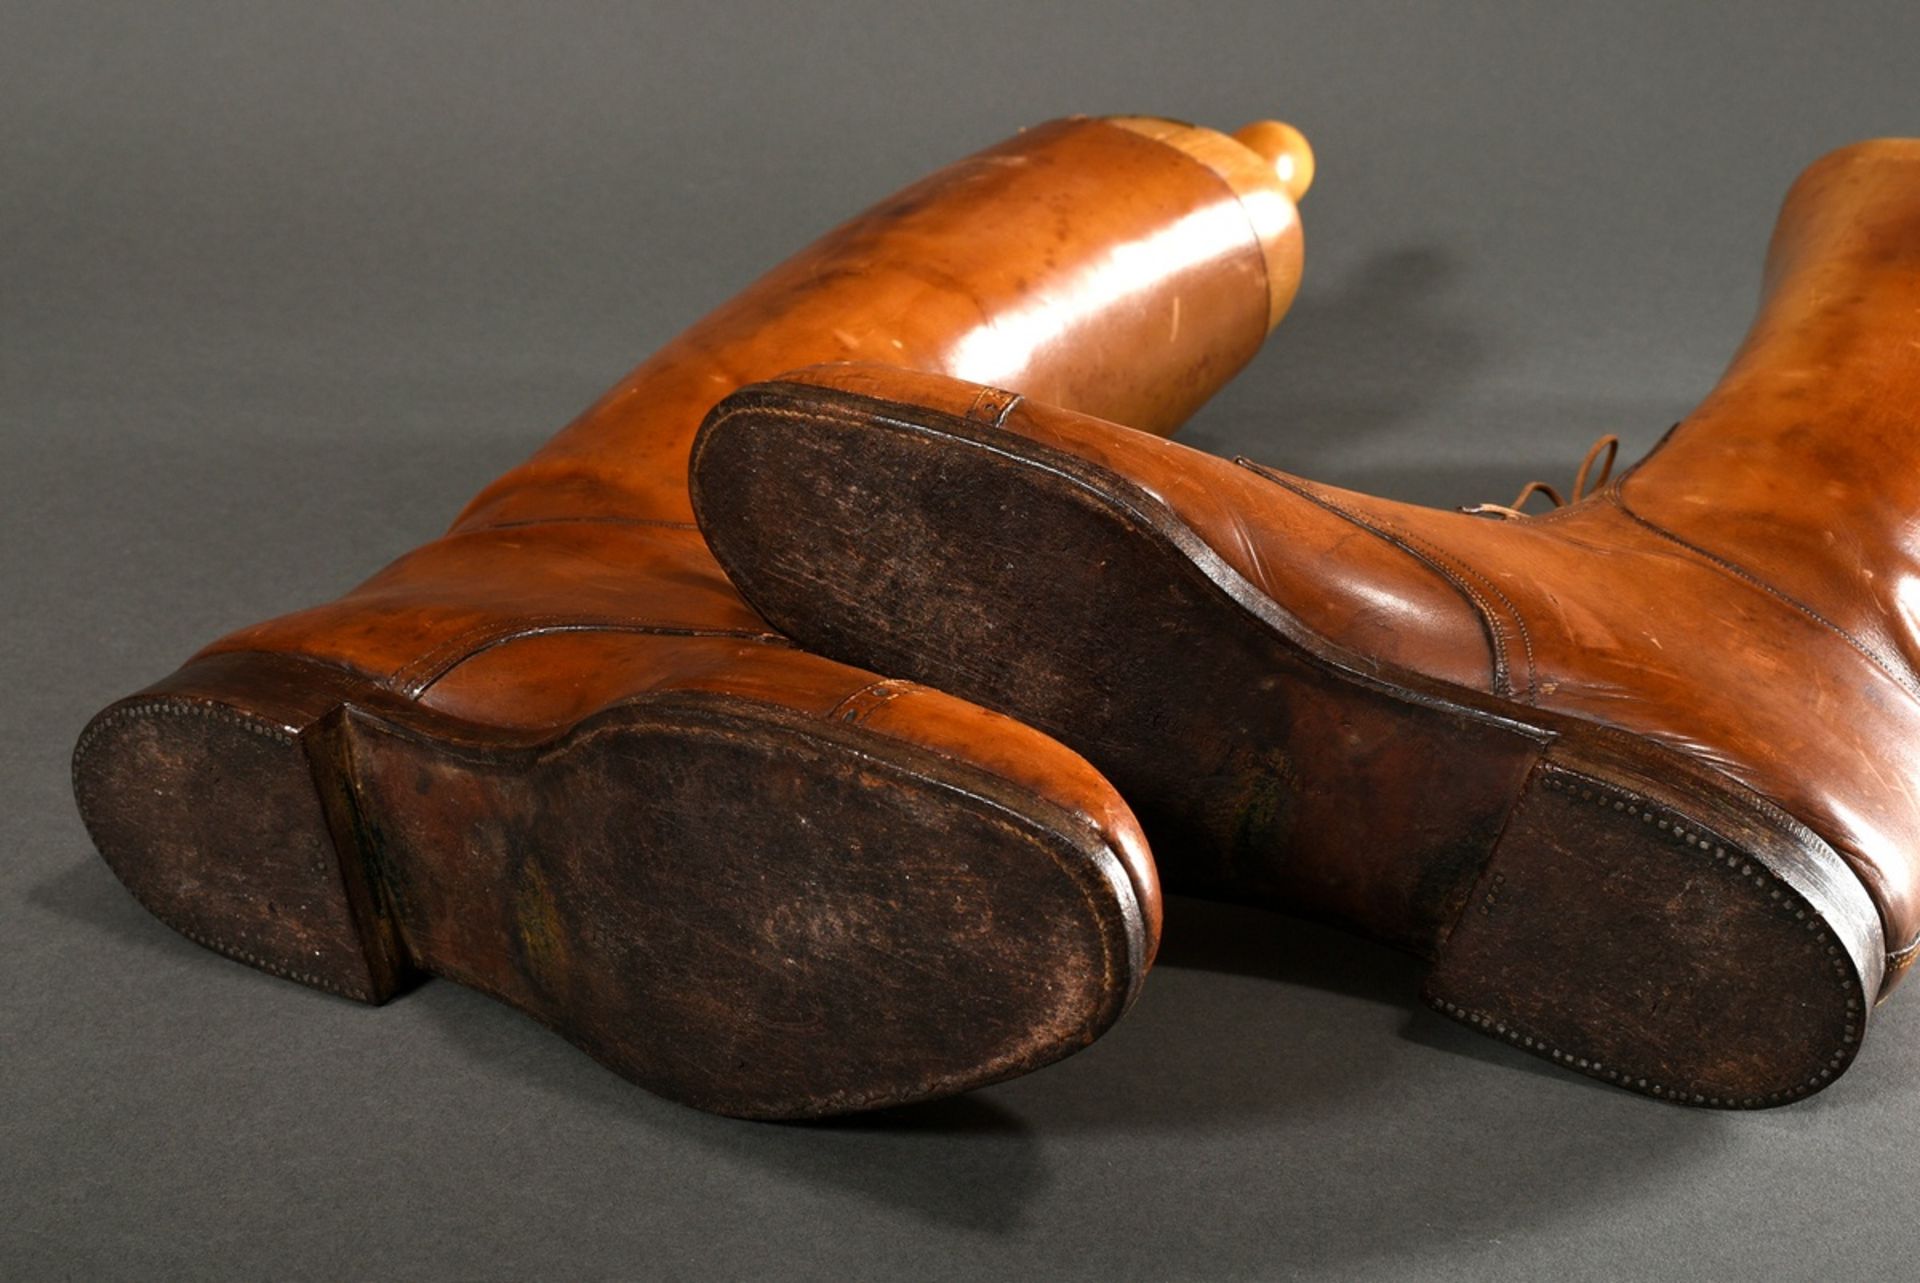 Pair of Edwardian polo boots "James Moore" with lacing and hole pattern, with inserted boot stretch - Image 8 of 8